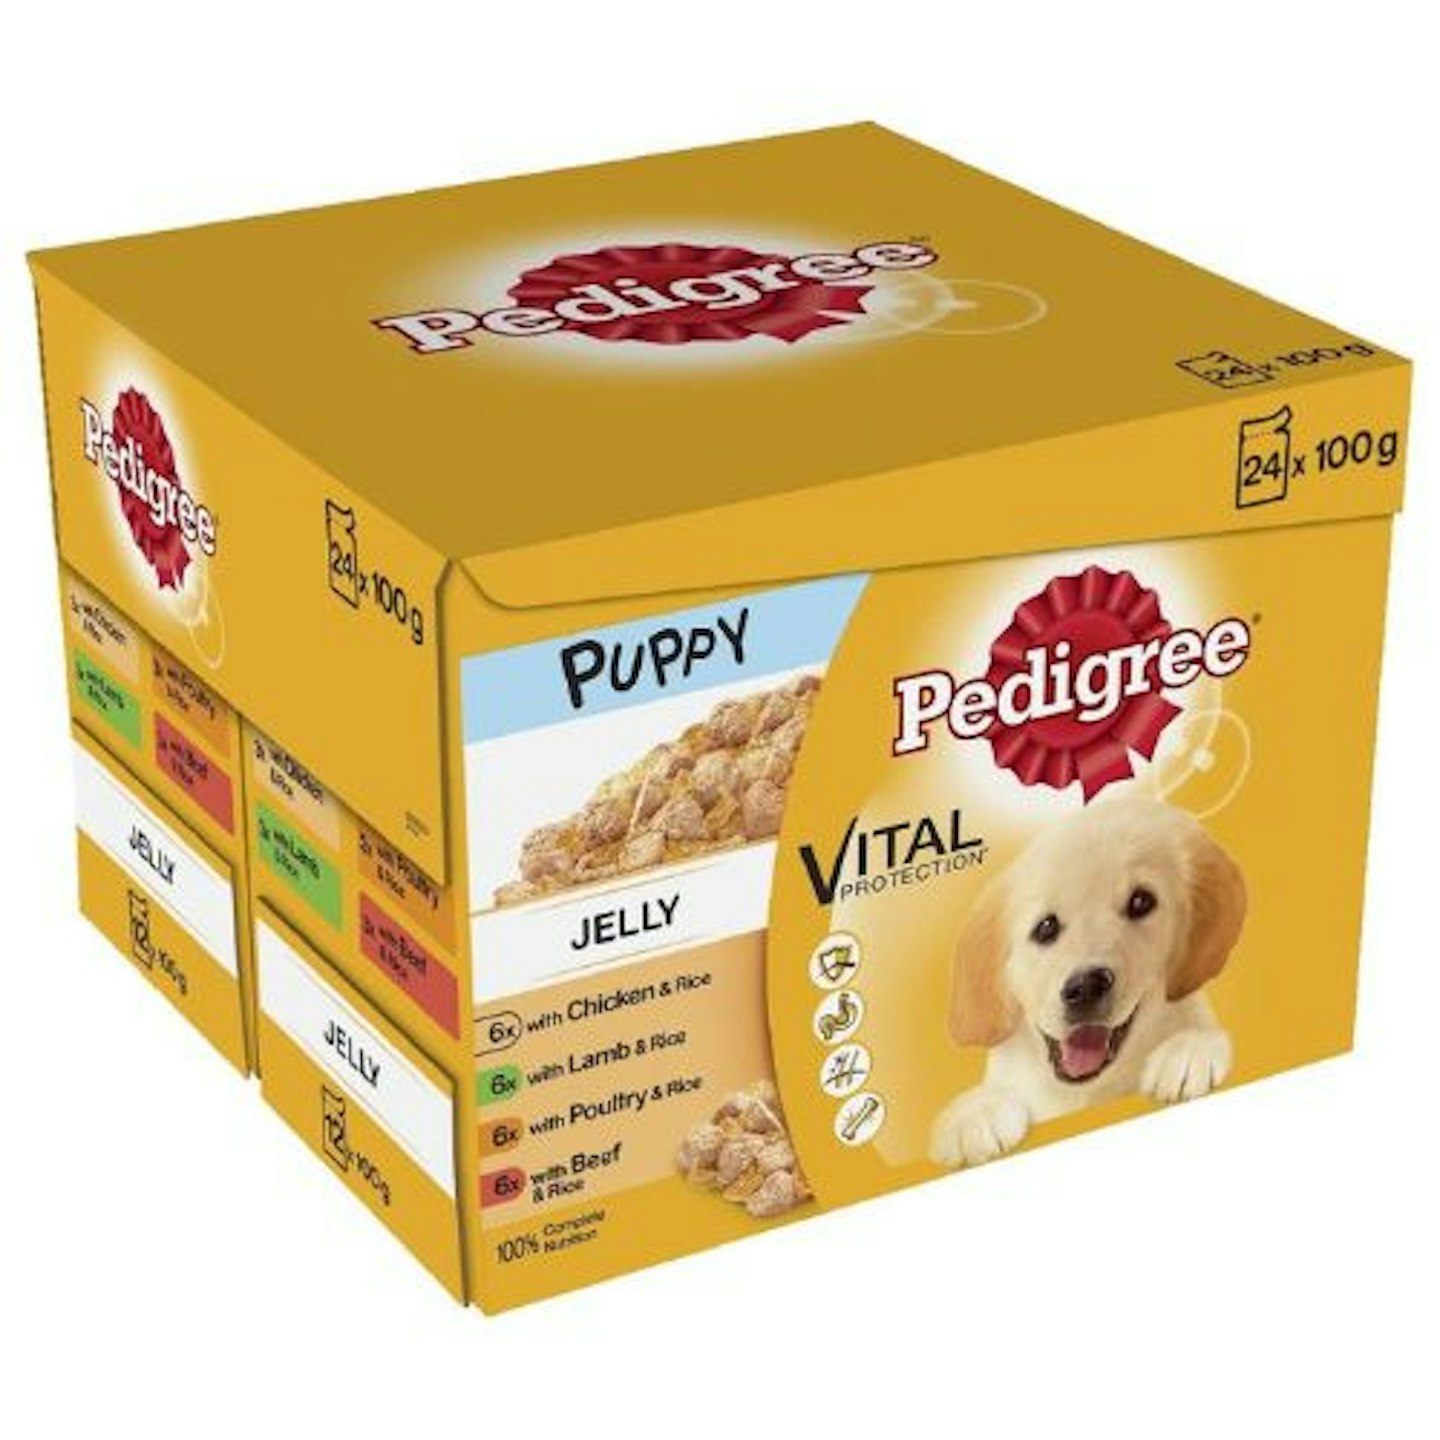  Pedigree Junior Wet Dog Food for Young Dogs and Puppies 2-12 Months Mixed Selection in Jelly, 48 Pouches (48 x 100 g) 